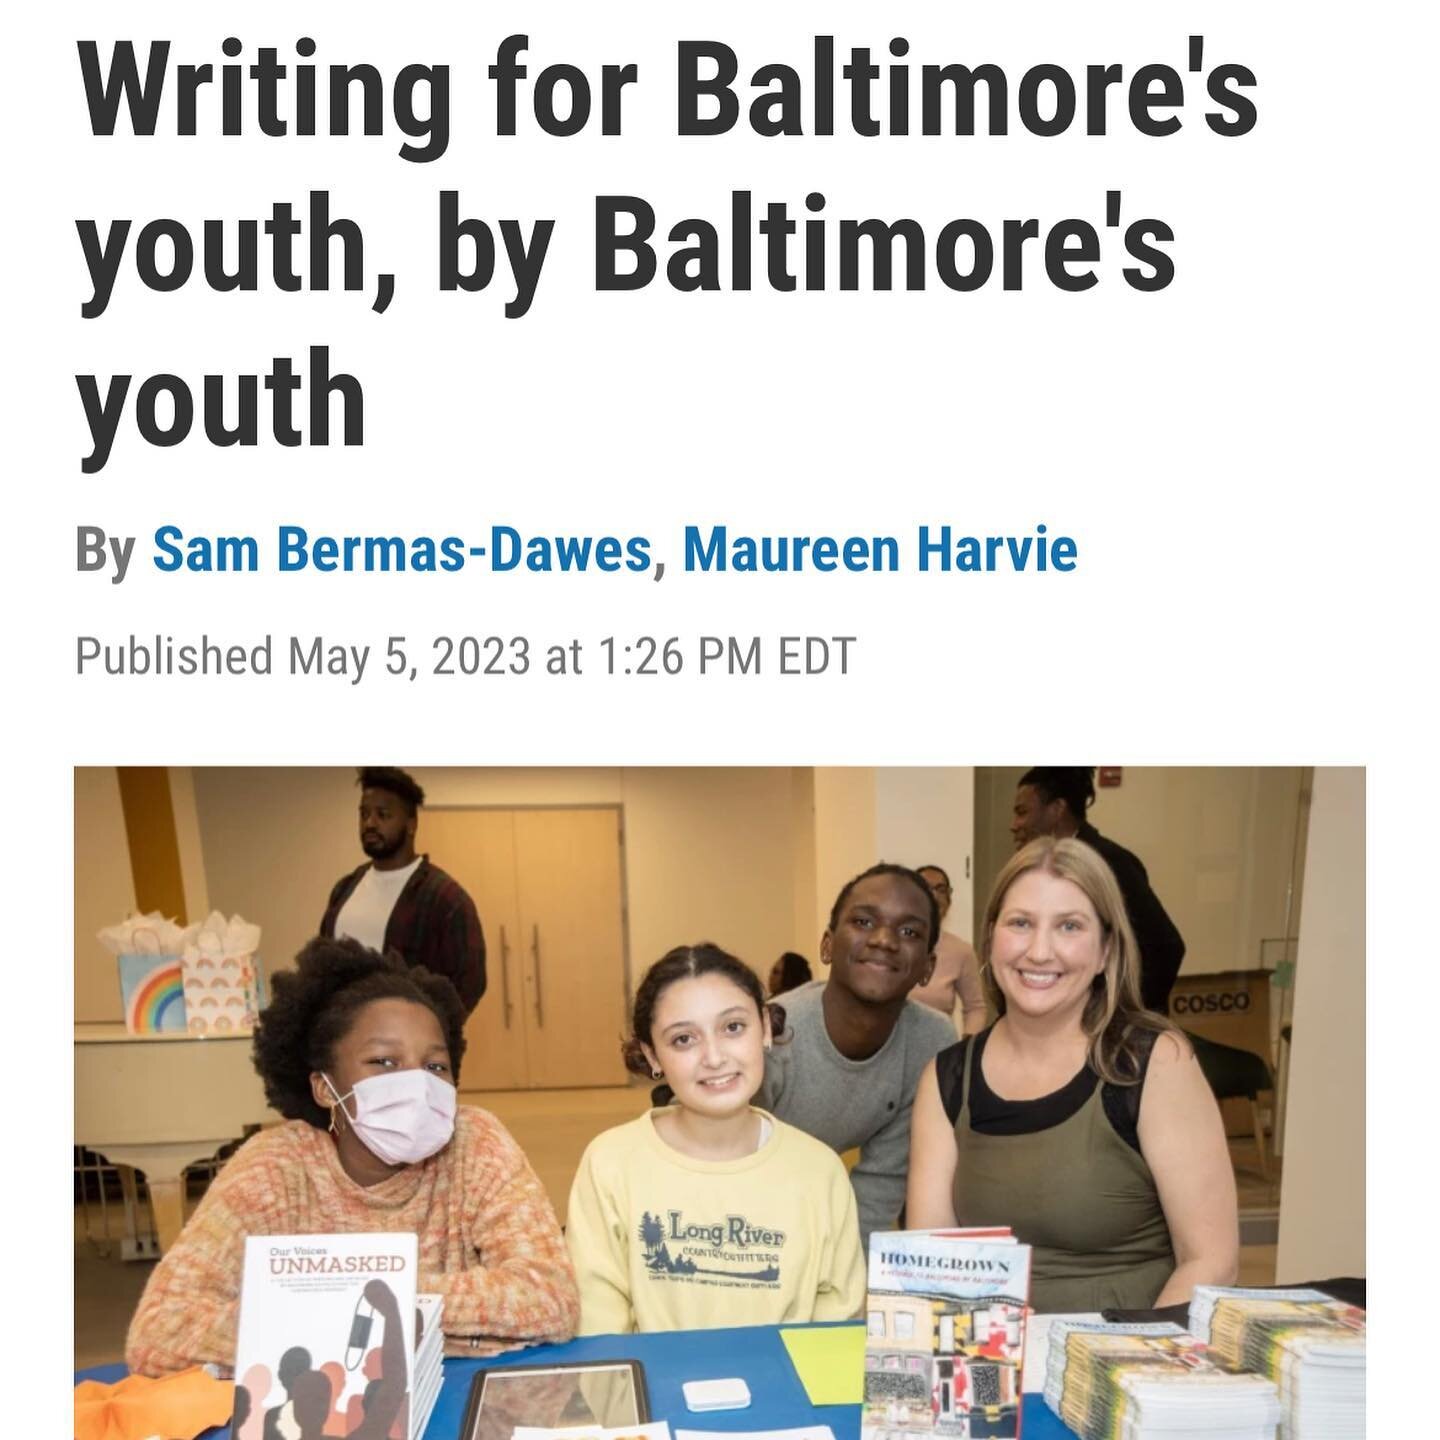 Check us out &ldquo;On the Record&rdquo; by clicking the link in our bio, or visiting: 

https://www.wypr.org/show/on-the-record/2023-05-05/writing-for-baltimores-youth-by-baltimores-youth